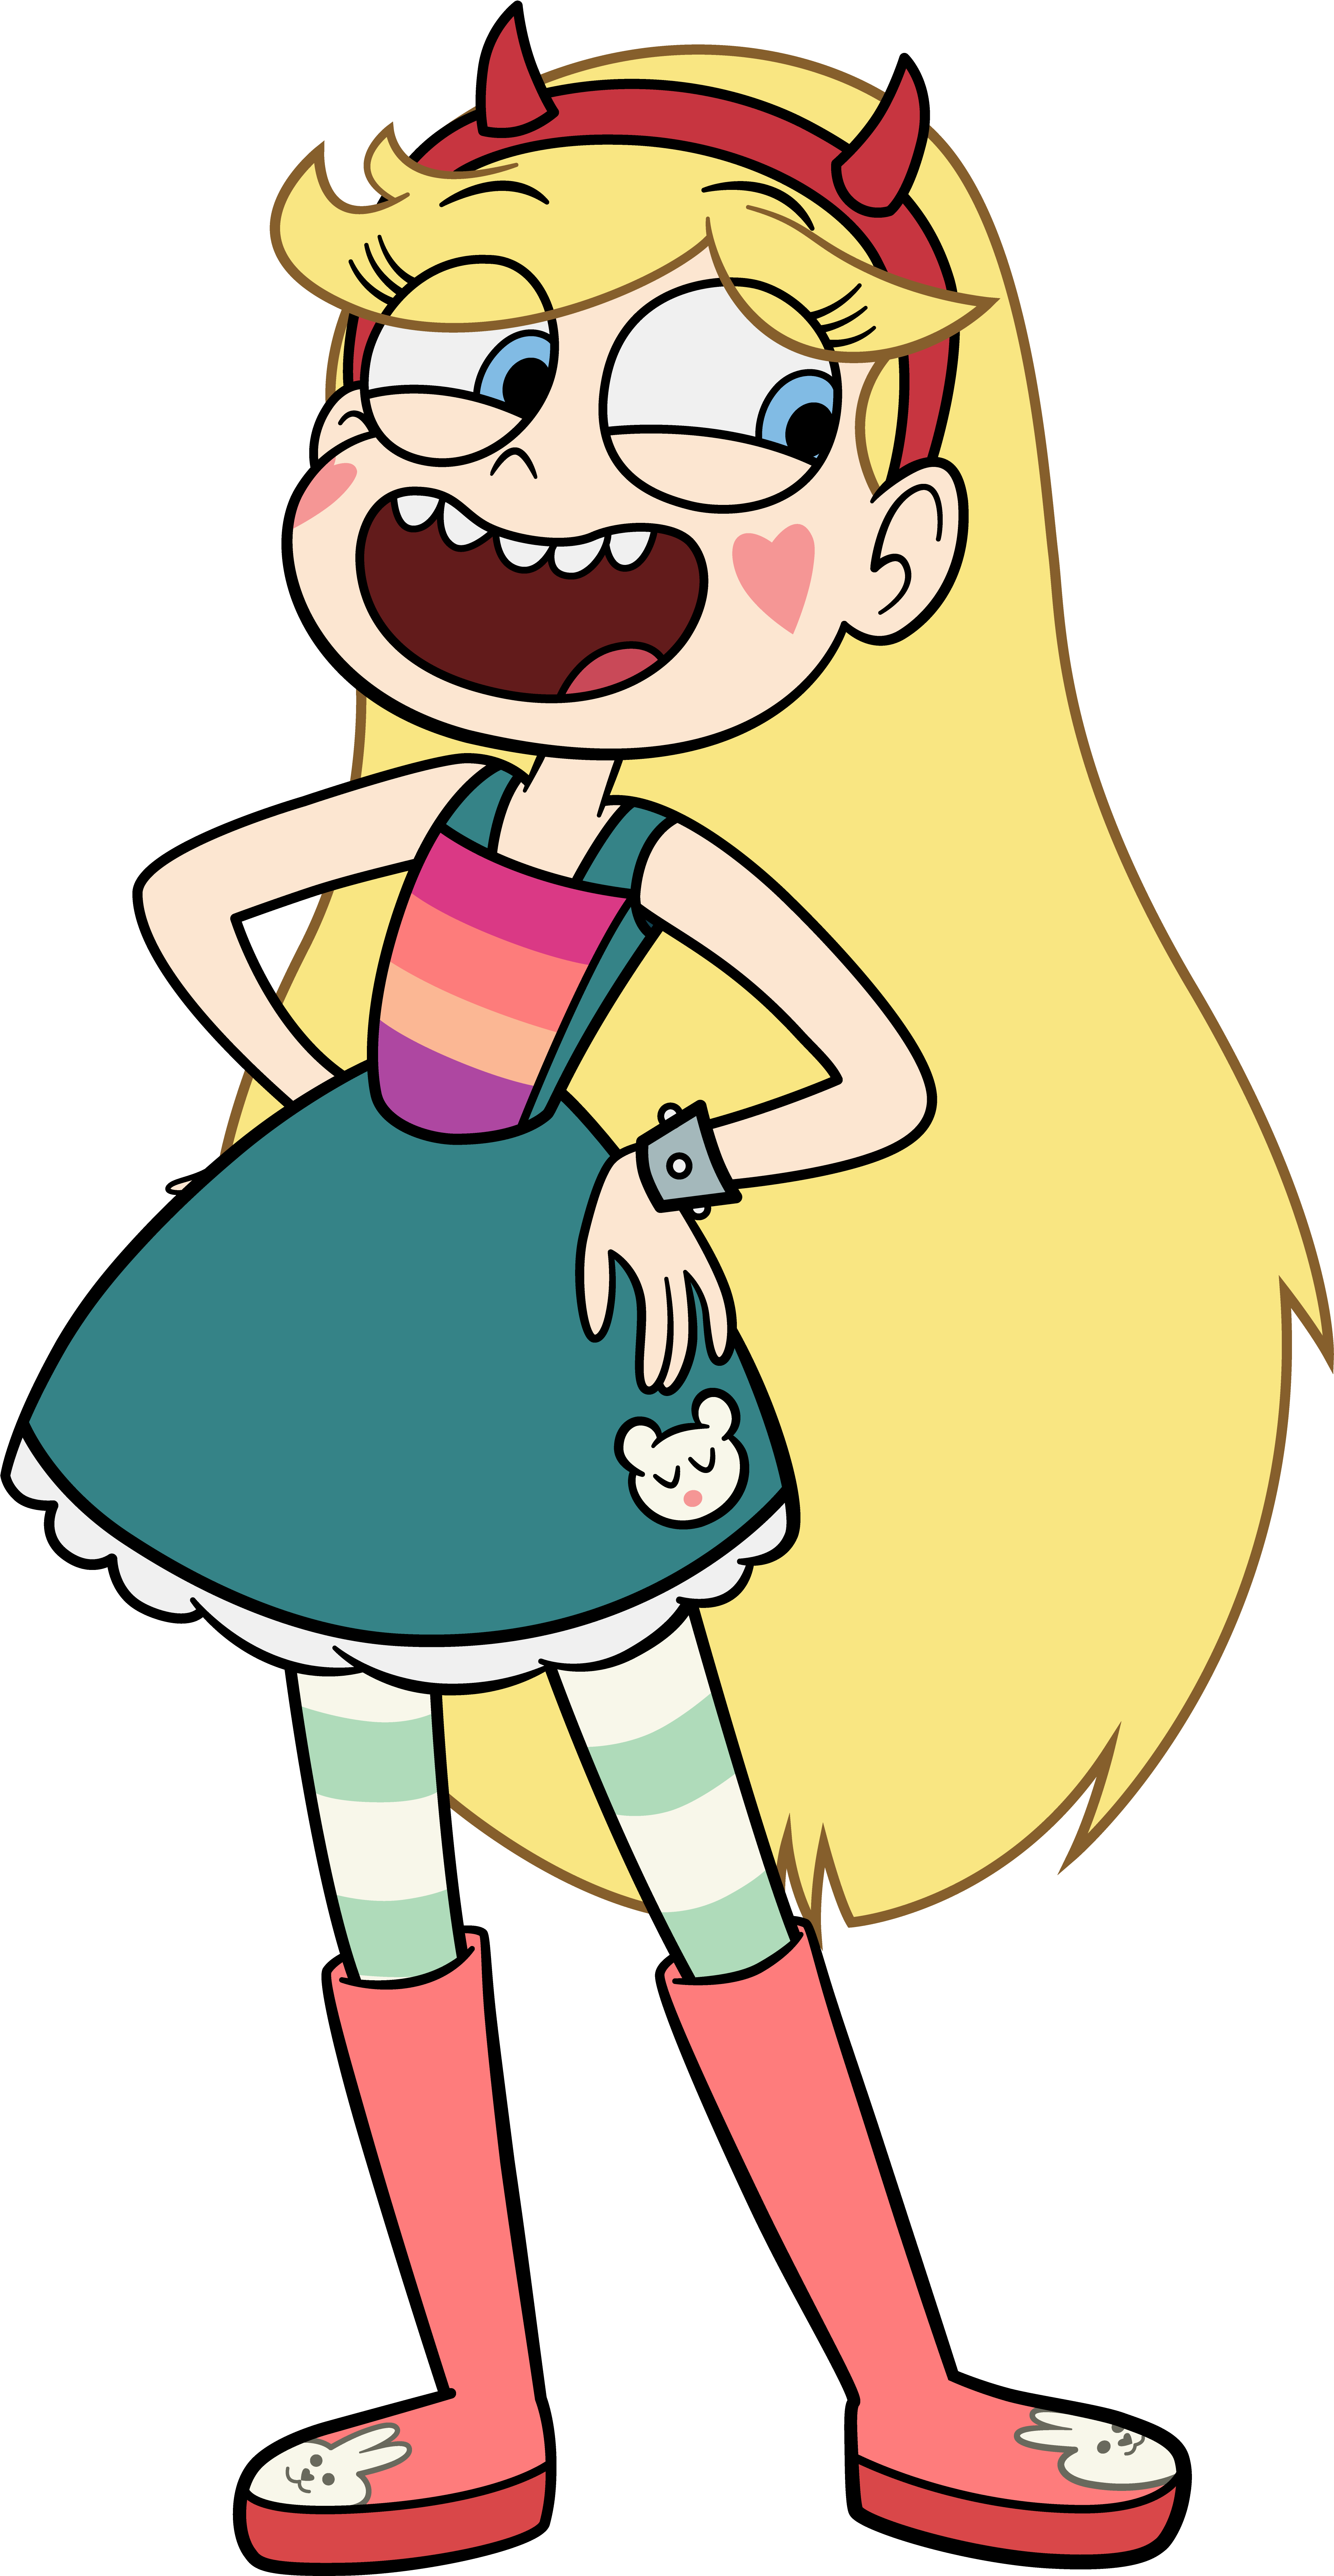 Star Vs The Forces of Evil No Background